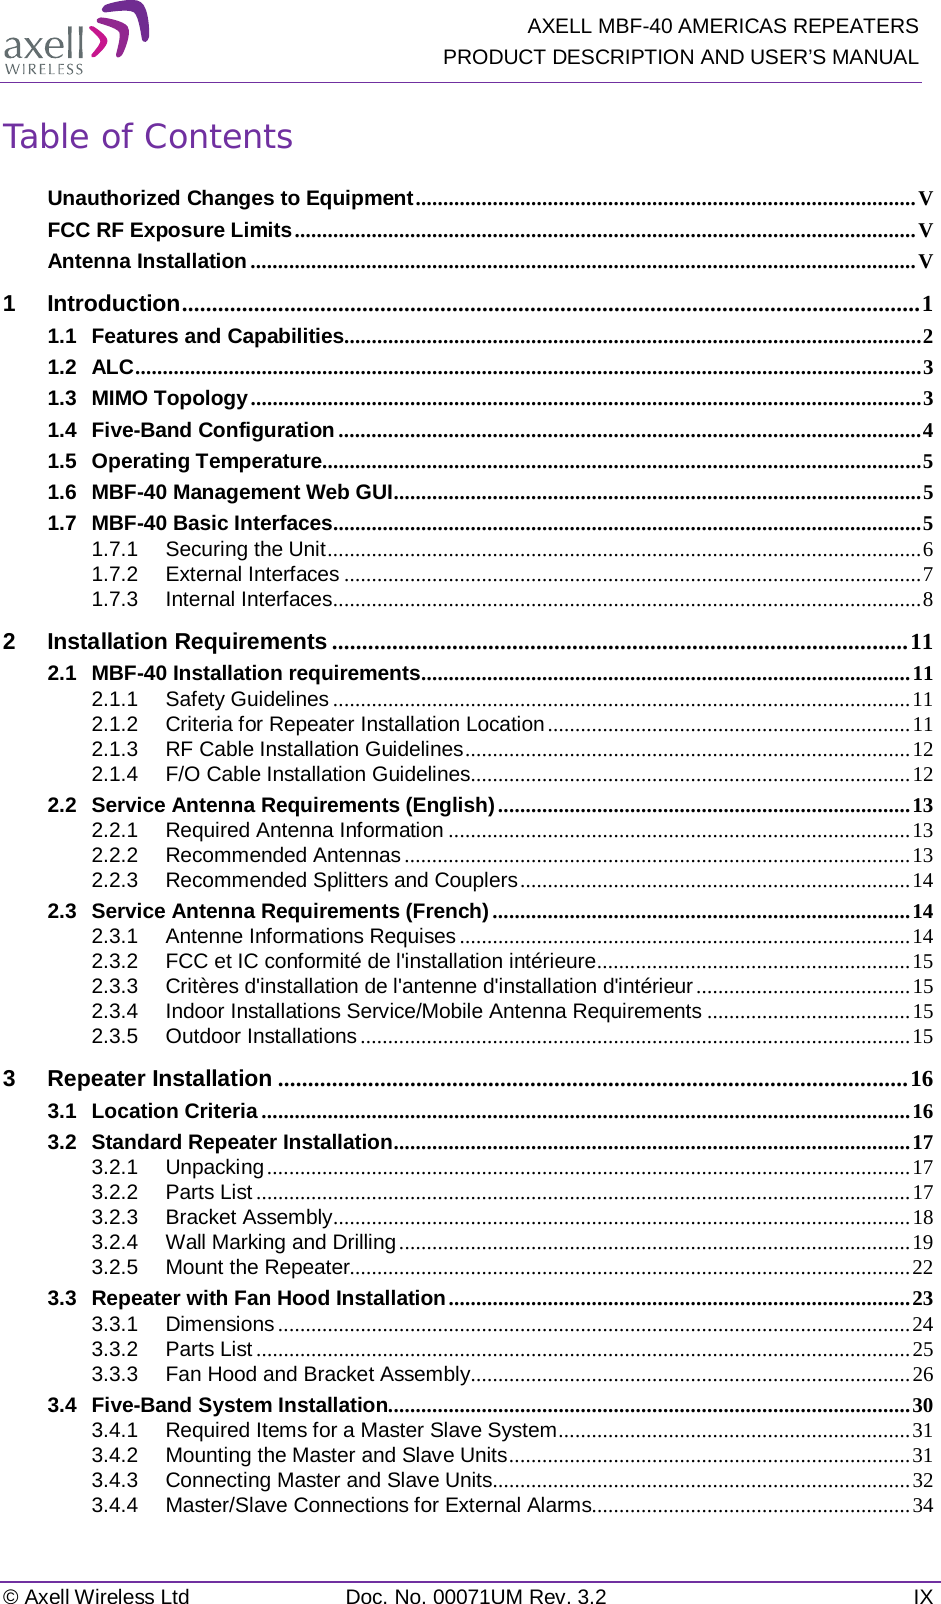  AXELL MBF-40 AMERICAS REPEATERS PRODUCT DESCRIPTION AND USER’S MANUAL © Axell Wireless Ltd Doc. No. 00071UM Rev. 3.2 IX Table of Contents Unauthorized Changes to Equipment ........................................................................................... V FCC RF Exposure Limits ................................................................................................................. V Antenna Installation ......................................................................................................................... V 1 Introduction ........................................................................................................................... 1 1.1 Features and Capabilities......................................................................................................... 2 1.2 ALC ............................................................................................................................................... 3 1.3 MIMO Topology .......................................................................................................................... 3 1.4 Five-Band Configuration .......................................................................................................... 4 1.5 Operating Temperature............................................................................................................. 5 1.6 MBF-40 Management Web GUI ................................................................................................ 5 1.7 MBF-40 Basic Interfaces ........................................................................................................... 5 1.7.1 Securing the Unit ............................................................................................................ 6 1.7.2 External Interfaces ......................................................................................................... 7 1.7.3 Internal Interfaces ........................................................................................................... 8 2 Installation Requirements ................................................................................................ 11 2.1 MBF-40 Installation requirements ......................................................................................... 11 2.1.1 Safety Guidelines ......................................................................................................... 11 2.1.2 Criteria for Repeater Installation Location .................................................................. 11 2.1.3 RF Cable Installation Guidelines ................................................................................. 12 2.1.4 F/O Cable Installation Guidelines ................................................................................ 12 2.2 Service Antenna Requirements (English) ........................................................................... 13 2.2.1 Required Antenna Information .................................................................................... 13 2.2.2 Recommended Antennas ............................................................................................ 13 2.2.3 Recommended Splitters and Couplers ....................................................................... 14 2.3 Service Antenna Requirements (French) ............................................................................ 14 2.3.1 Antenne Informations Requises .................................................................................. 14 2.3.2 FCC et IC conformité de l&apos;installation intérieure ......................................................... 15 2.3.3 Critères d&apos;installation de l&apos;antenne d&apos;installation d&apos;intérieur ....................................... 15 2.3.4 Indoor Installations Service/Mobile Antenna Requirements ..................................... 15 2.3.5 Outdoor Installations .................................................................................................... 15 3 Repeater Installation ......................................................................................................... 16 3.1 Location Criteria ...................................................................................................................... 16 3.2 Standard Repeater Installation .............................................................................................. 17 3.2.1 Unpacking ..................................................................................................................... 17 3.2.2 Parts List ....................................................................................................................... 17 3.2.3 Bracket Assembly ......................................................................................................... 18 3.2.4 Wall Marking and Drilling ............................................................................................. 19 3.2.5 Mount the Repeater...................................................................................................... 22 3.3 Repeater with Fan Hood Installation .................................................................................... 23 3.3.1 Dimensions ................................................................................................................... 24 3.3.2 Parts List ....................................................................................................................... 25 3.3.3 Fan Hood and Bracket Assembly ................................................................................ 26 3.4 Five-Band System Installation............................................................................................... 30 3.4.1 Required Items for a Master Slave System ................................................................ 31 3.4.2 Mounting the Master and Slave Units ......................................................................... 31 3.4.3 Connecting Master and Slave Units ............................................................................ 32 3.4.4 Master/Slave Connections for External Alarms.......................................................... 34 